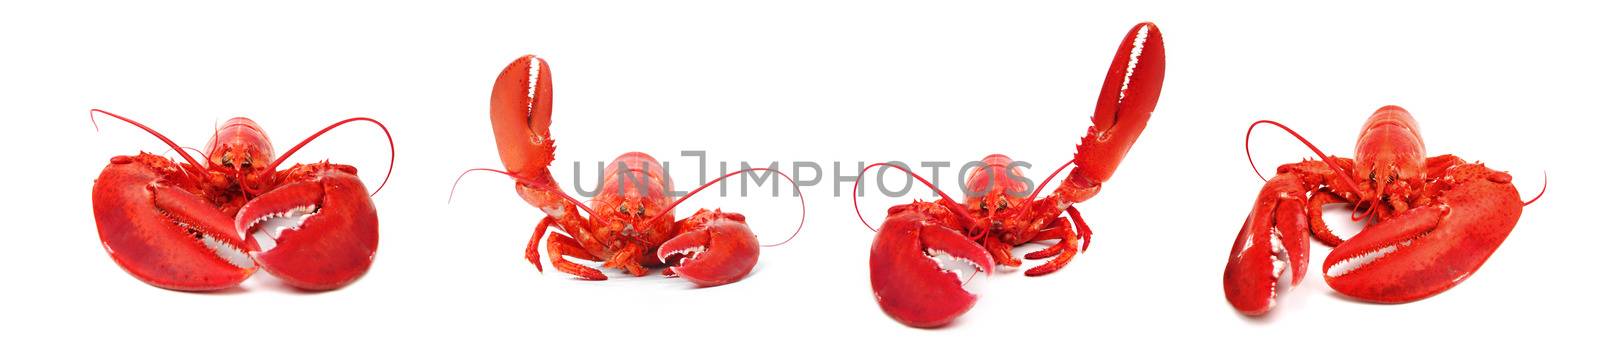 hello lobster set isolated on white background